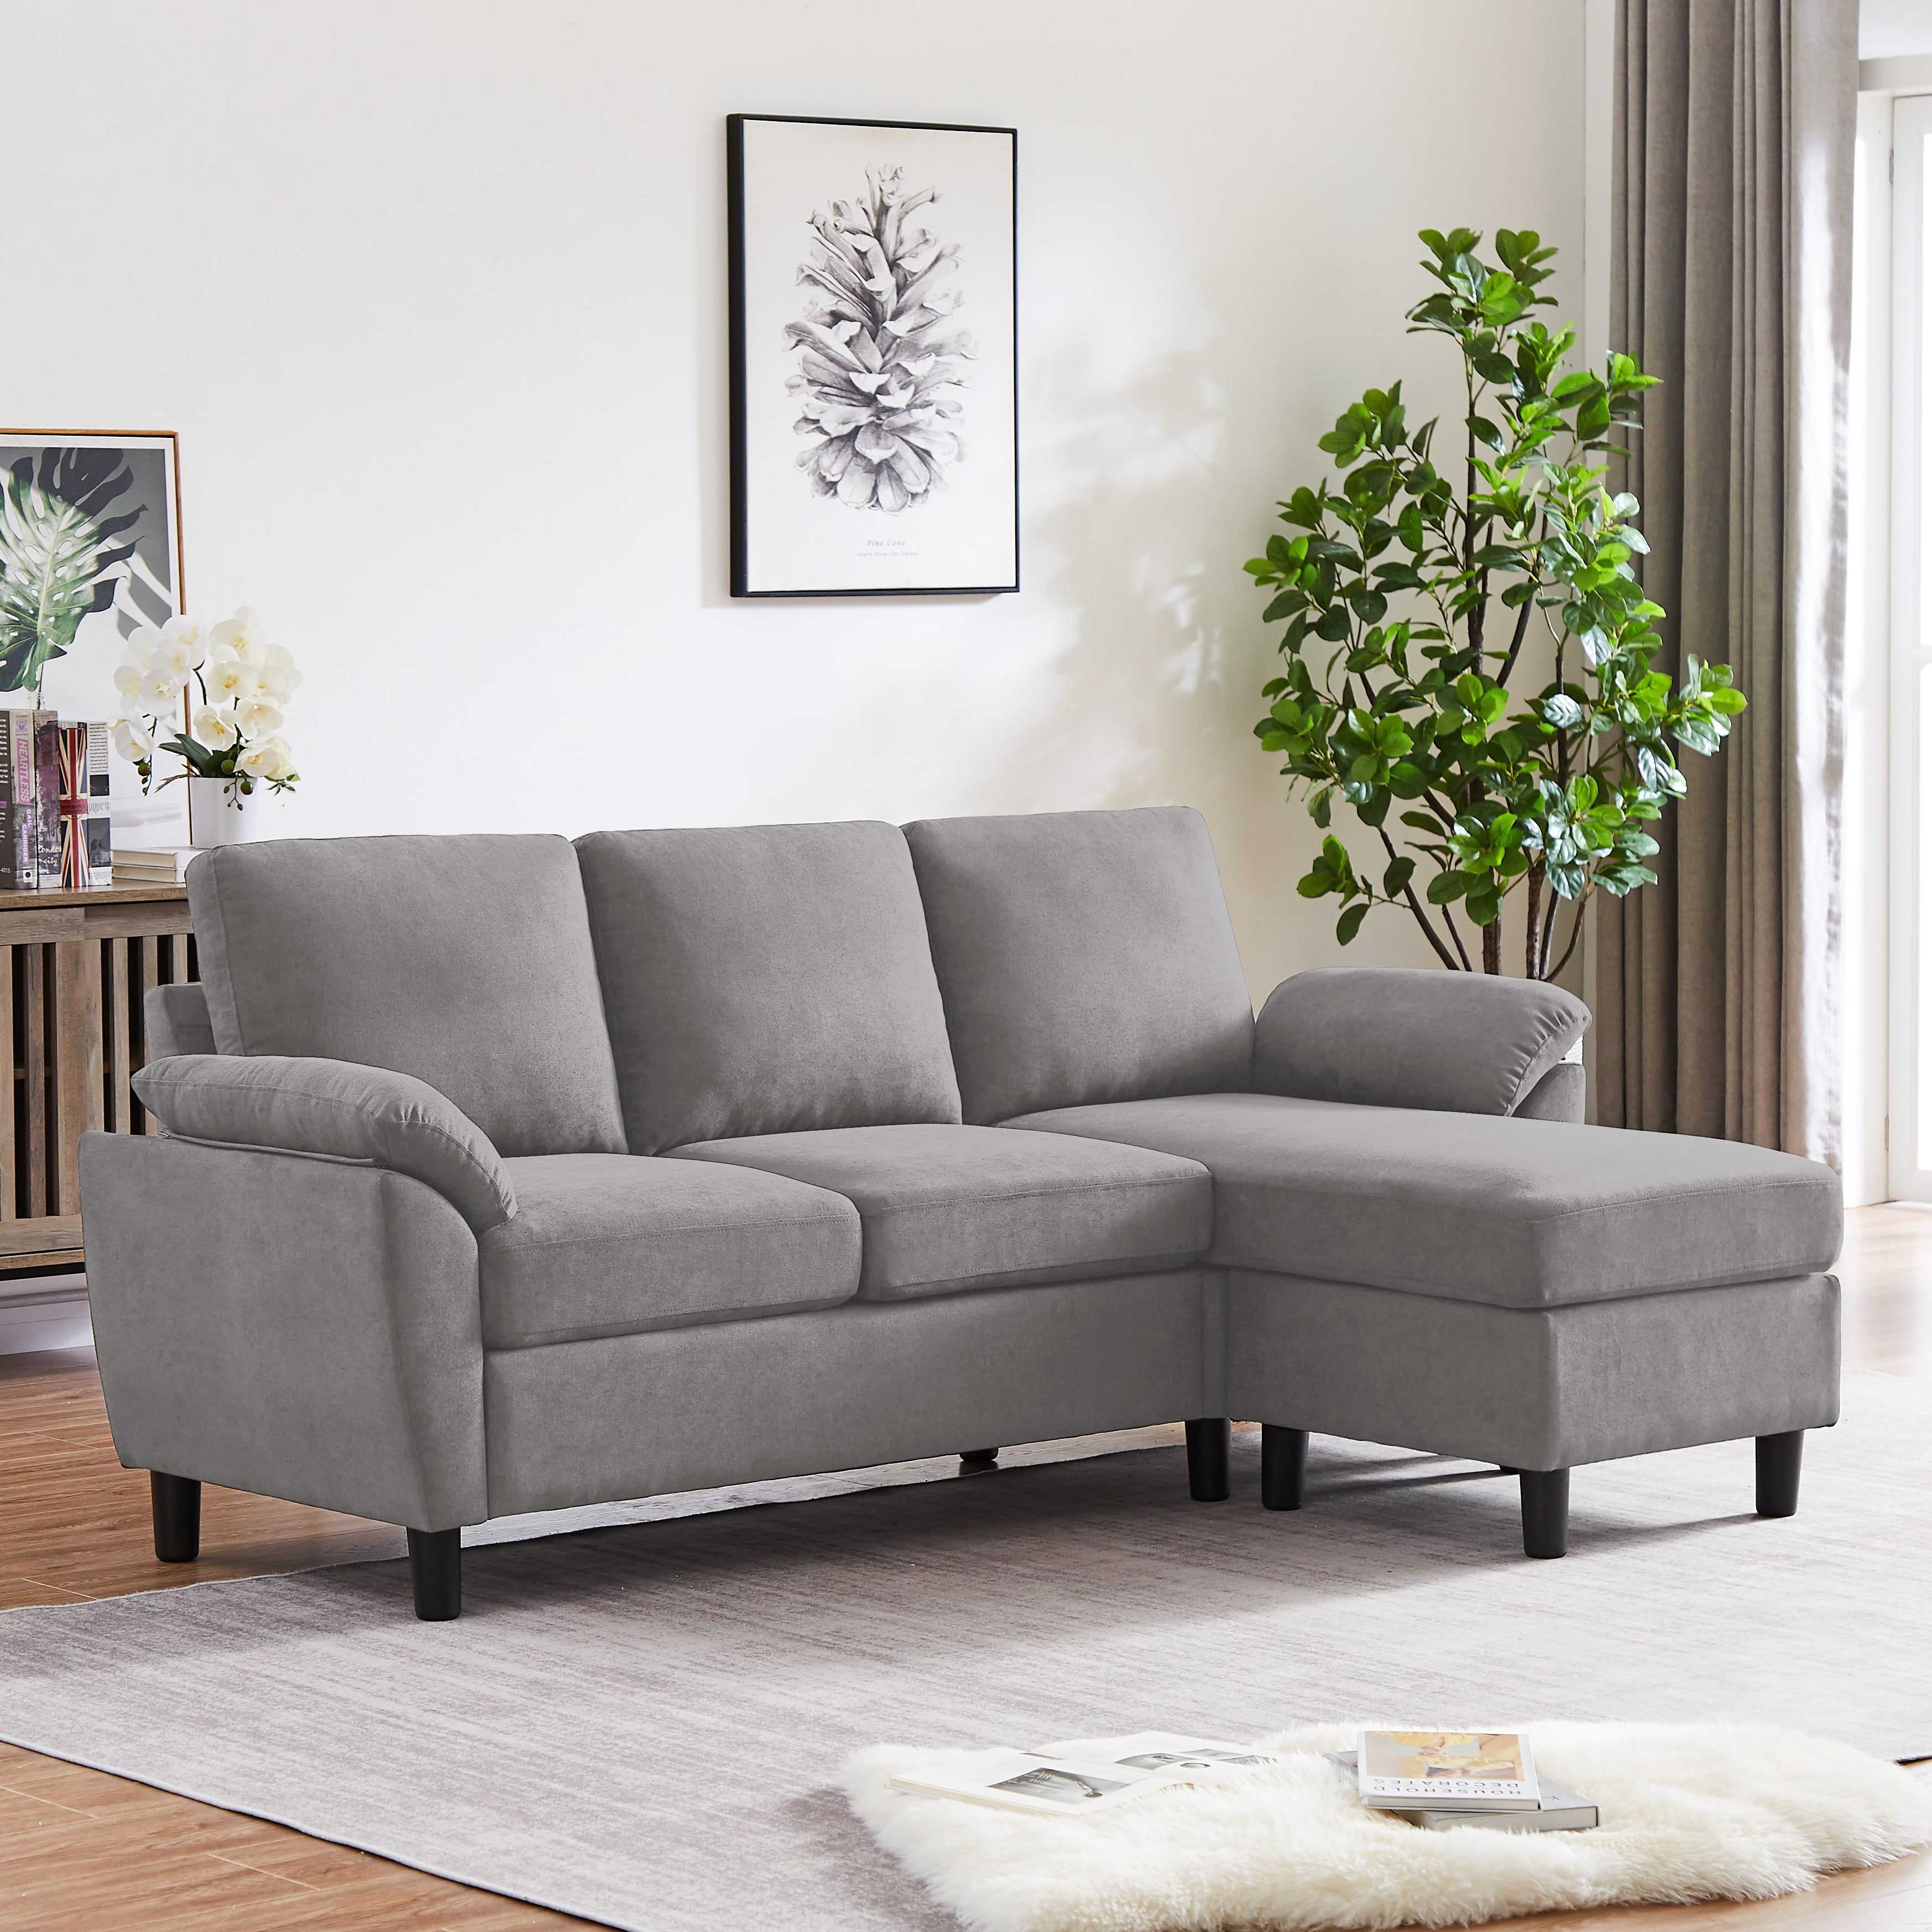 Jarenie Modern Fabric L Shapped Sofa Sectional Couches For Living Room  Convertible Sofa With Matching Chaise For Office, Apartment, Studio –  Walmart Regarding Office Modern Fabric Sofas (Photo 1 of 15)